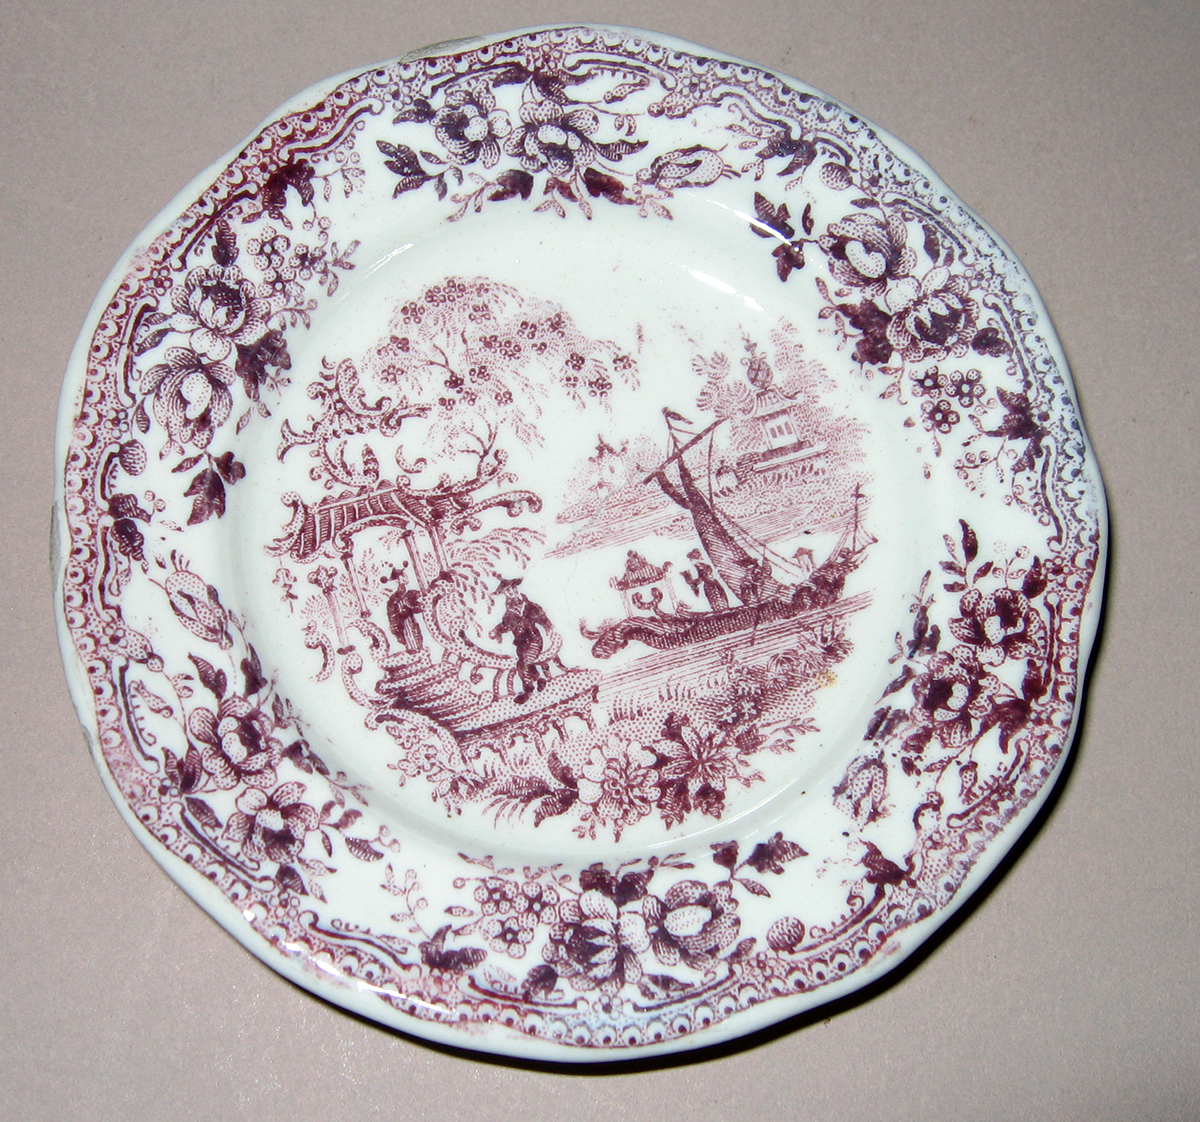 1955.0136.196 Miniature plate with chinoiserie printed scene